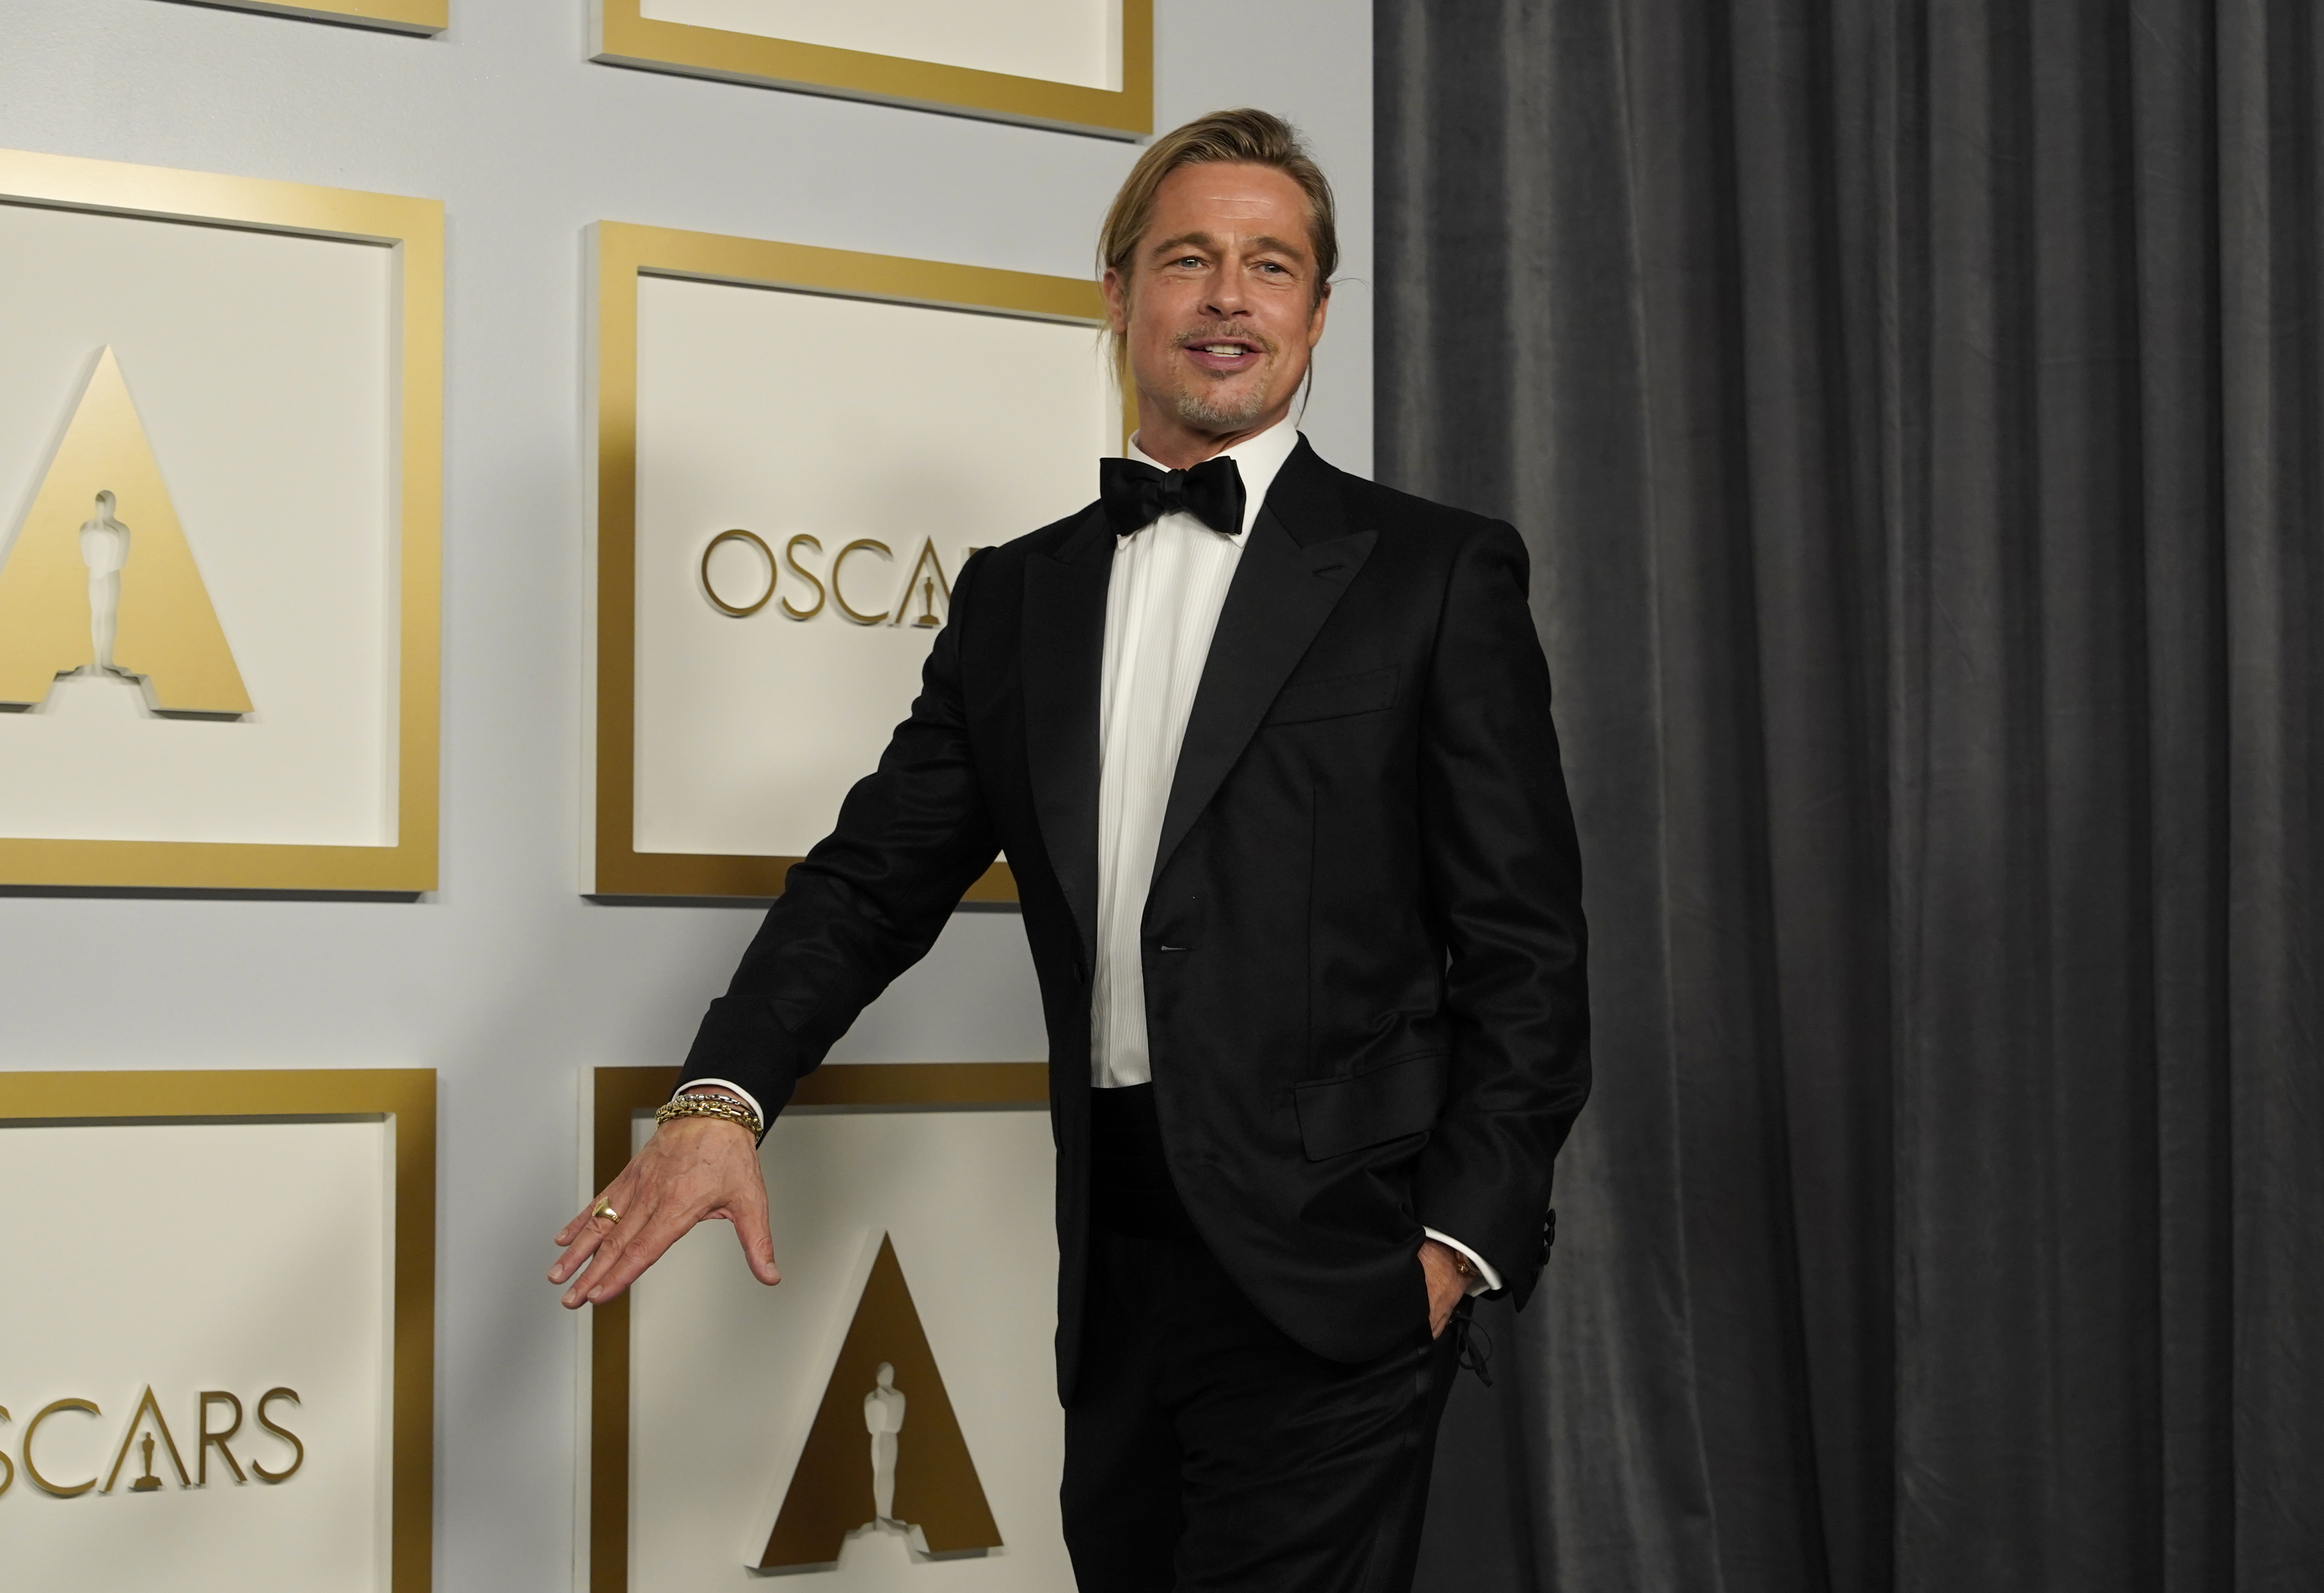 Brad Pitt poses in the press room at the Oscars on Sunday, April 25, 2021, at Union Station in Los Angeles. (AP Photo/Chris Pizzello, Pool)